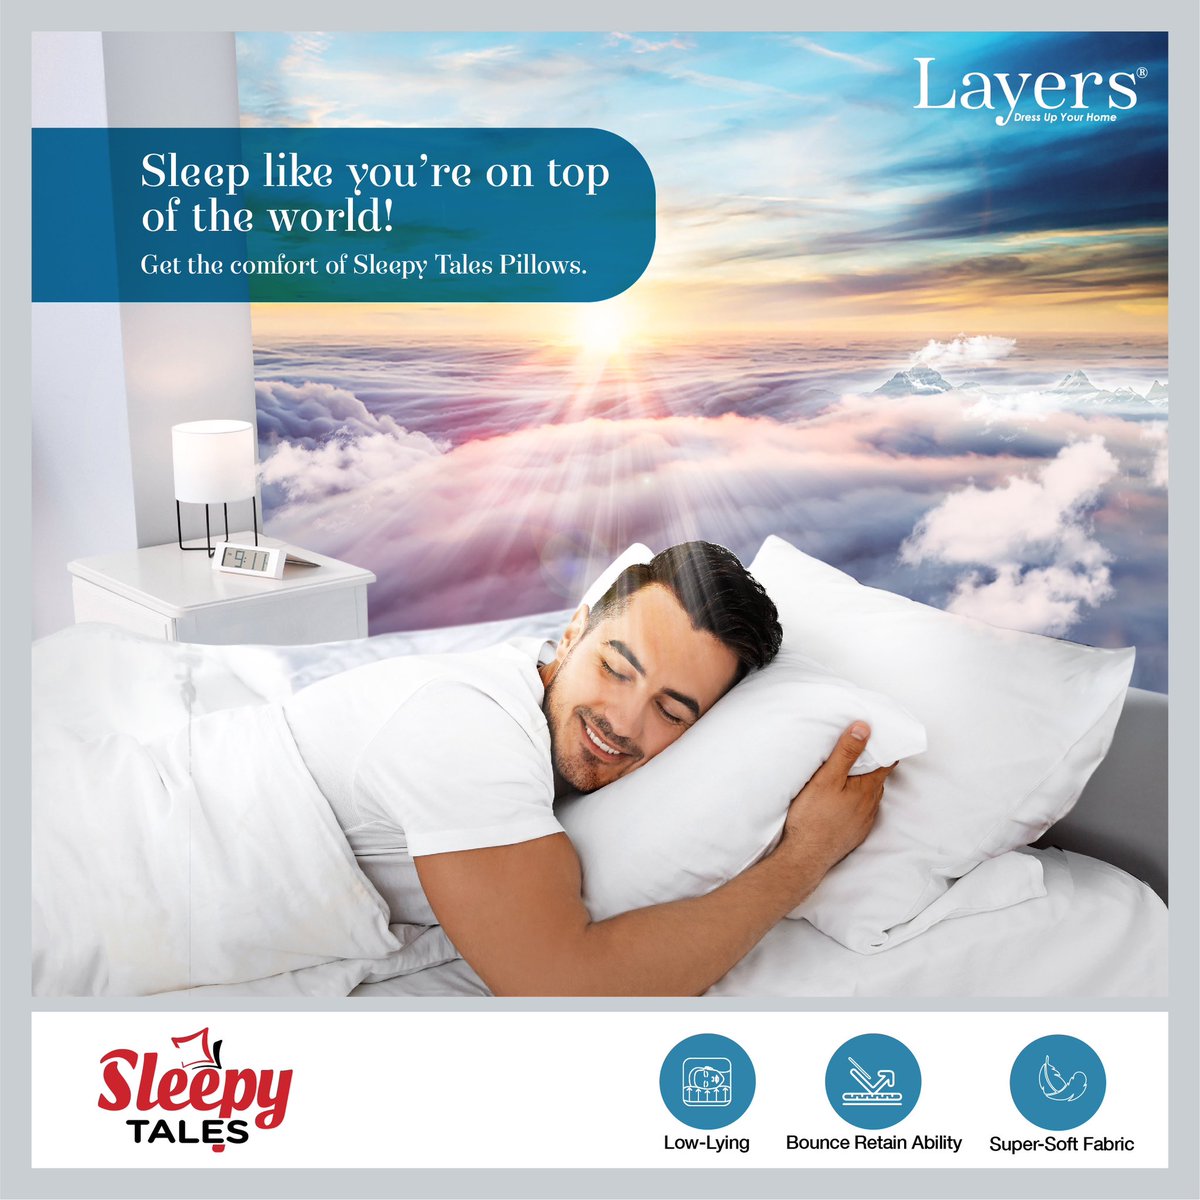 Dress up your space with the comfort of feather-soft pillows. Try out Sleepy Tales pillows from Layers, a joy to experience.
#Softpillows #pillowrange #newcollection #SleepyTalesPillows #comfortable #Bedsheets #Towels #pillows #comforters #dohars #DressUpYourHome #Layers